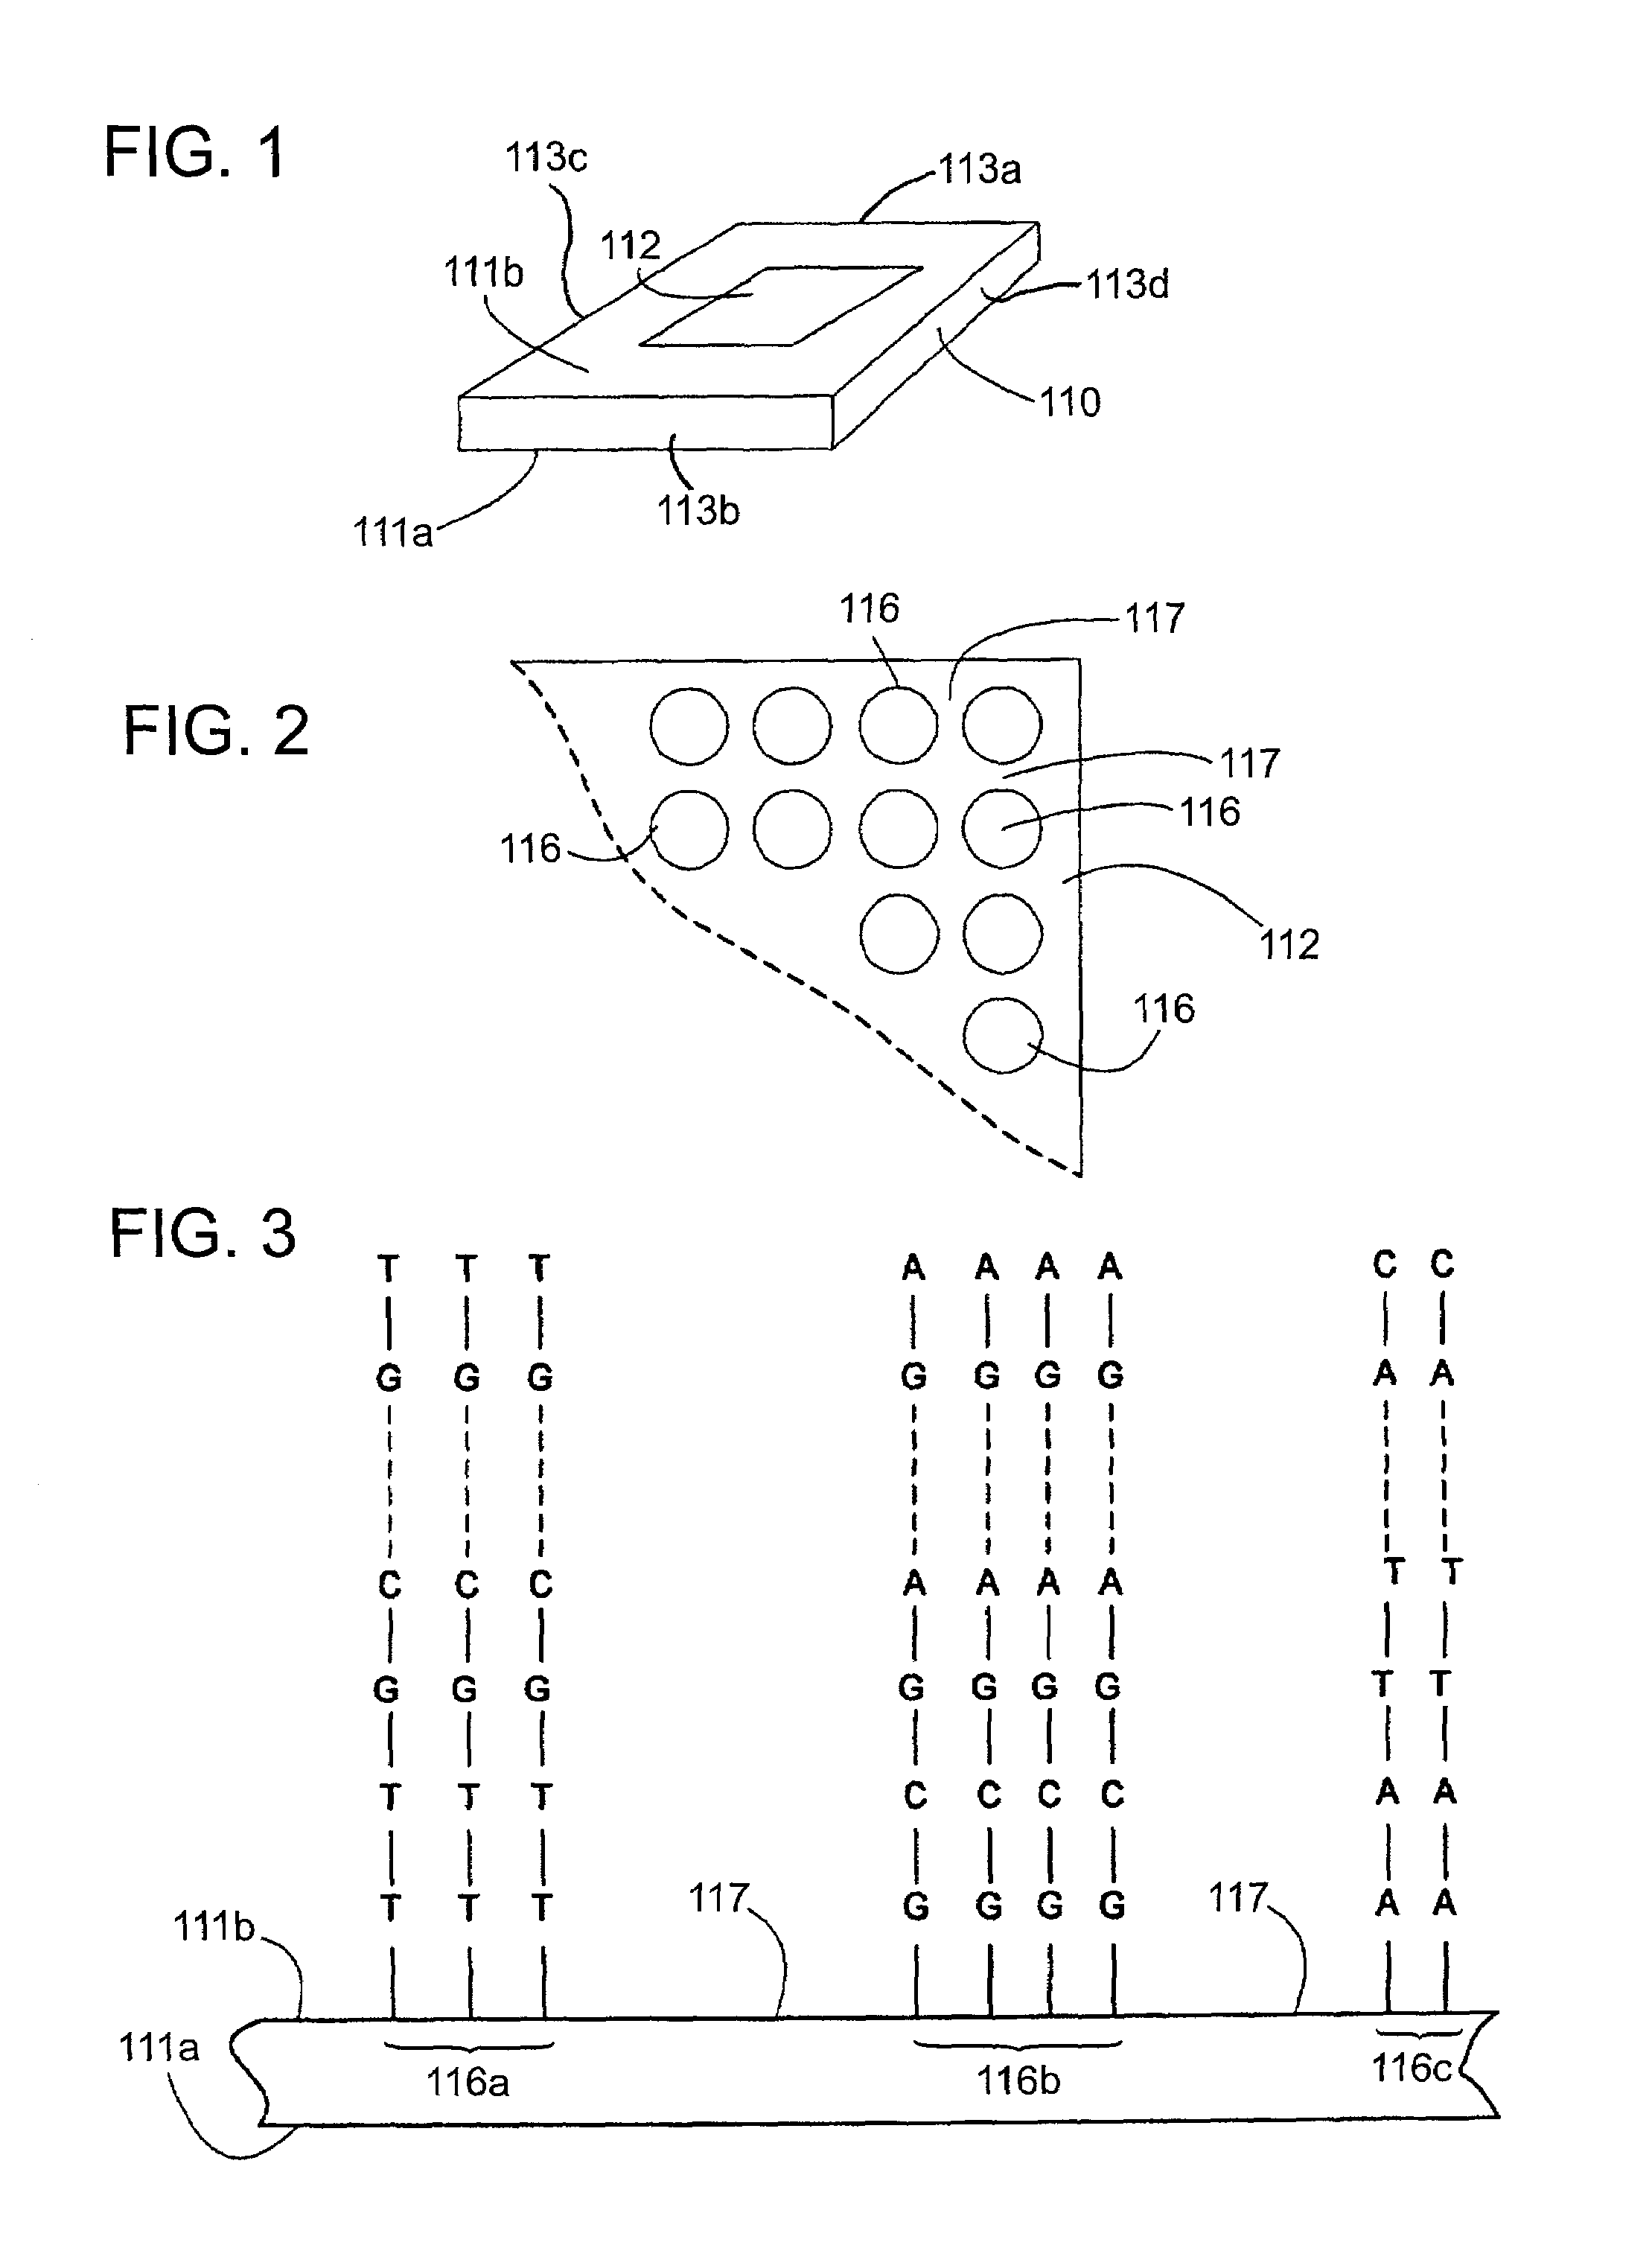 Array assay devices and methods of using the same